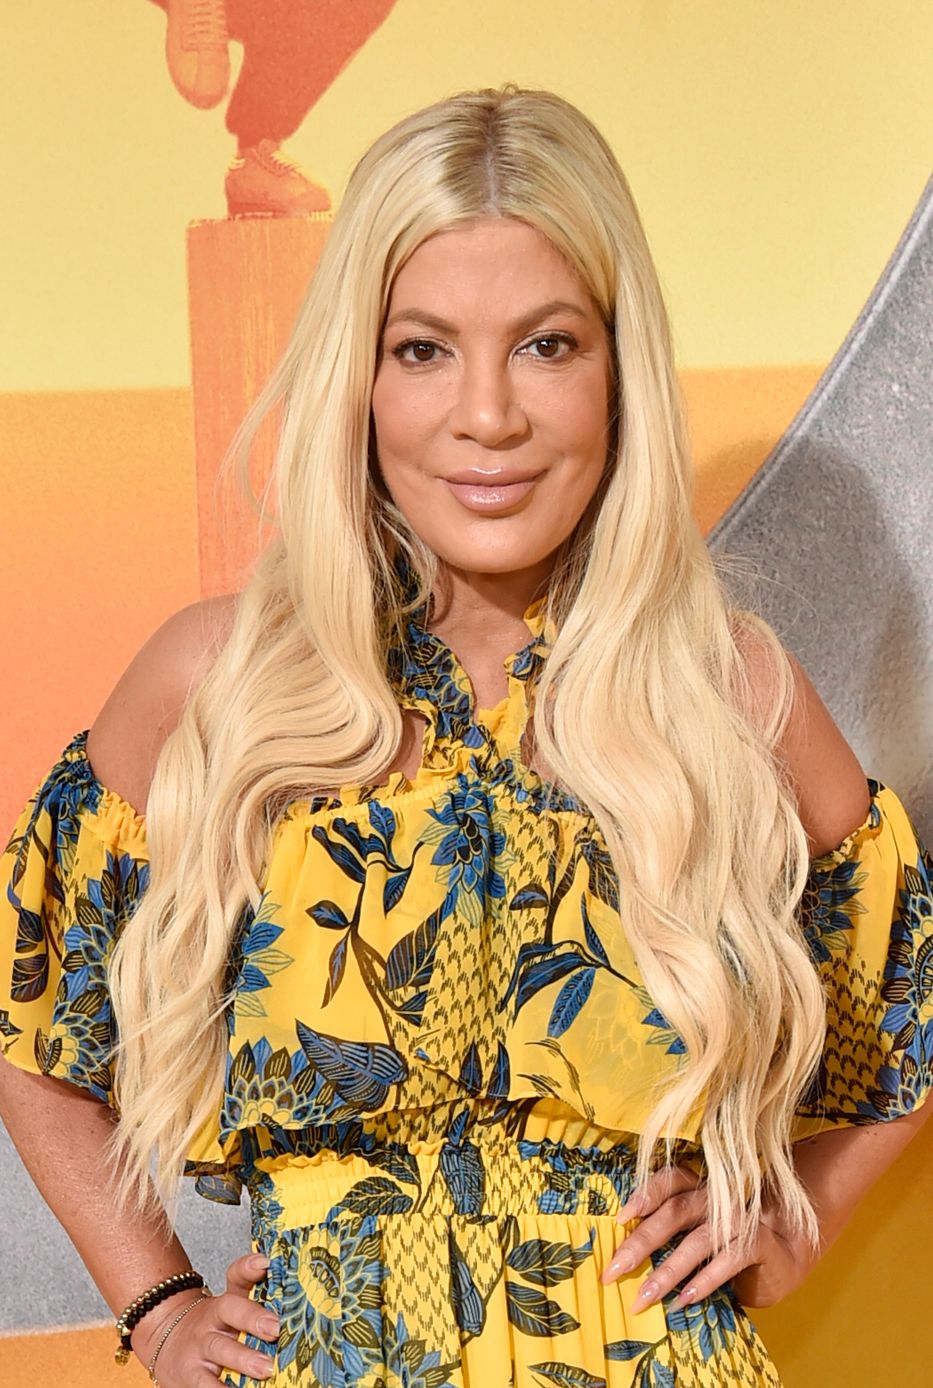 Tori Spelling attends Illumination and Universal Pictures' "Minions: The Rise of Gru" Los Angeles premiere on June 25, 2022 in Hollywood, California